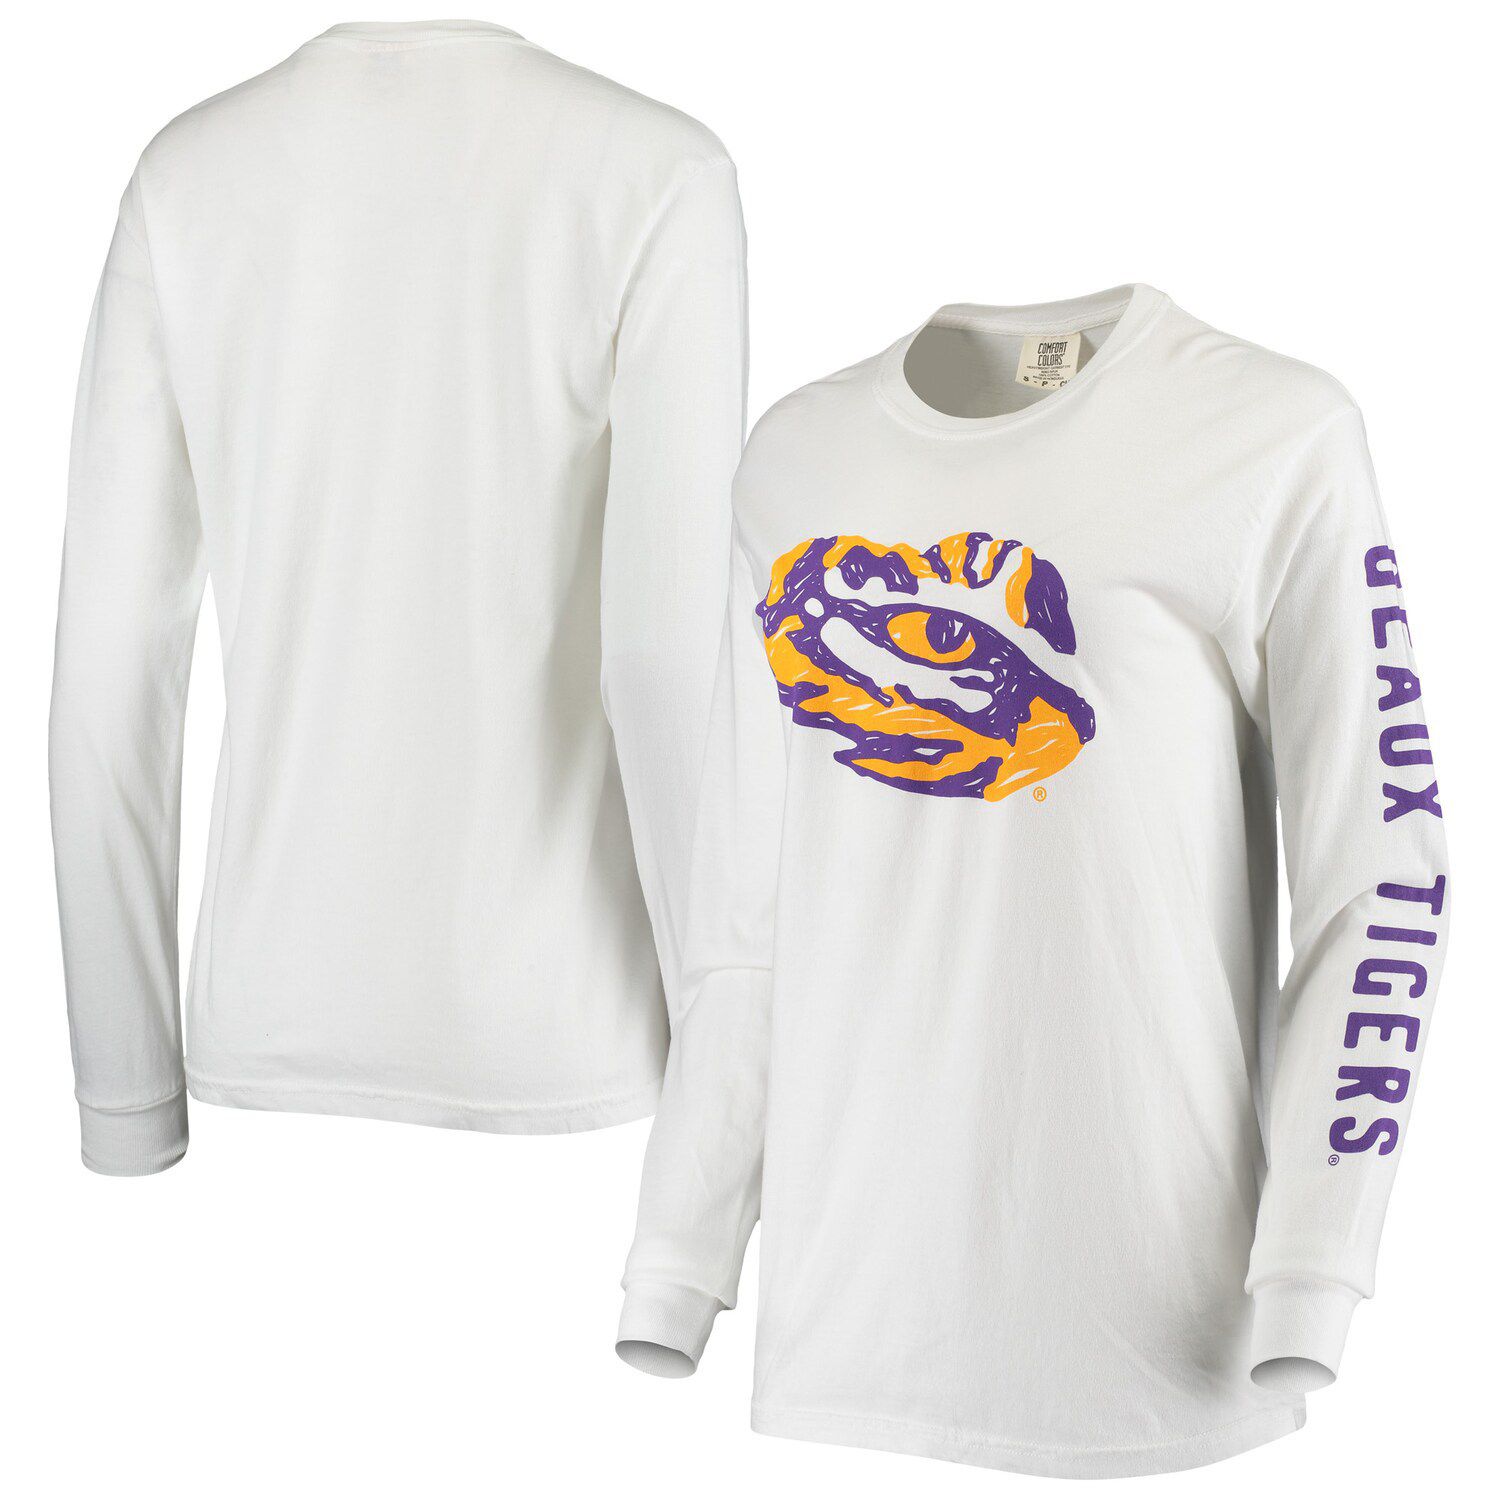 Image for Unbranded Women's White LSU Tigers Drawn Logo Oversized Long Sleeve T-Shirt at Kohl's.